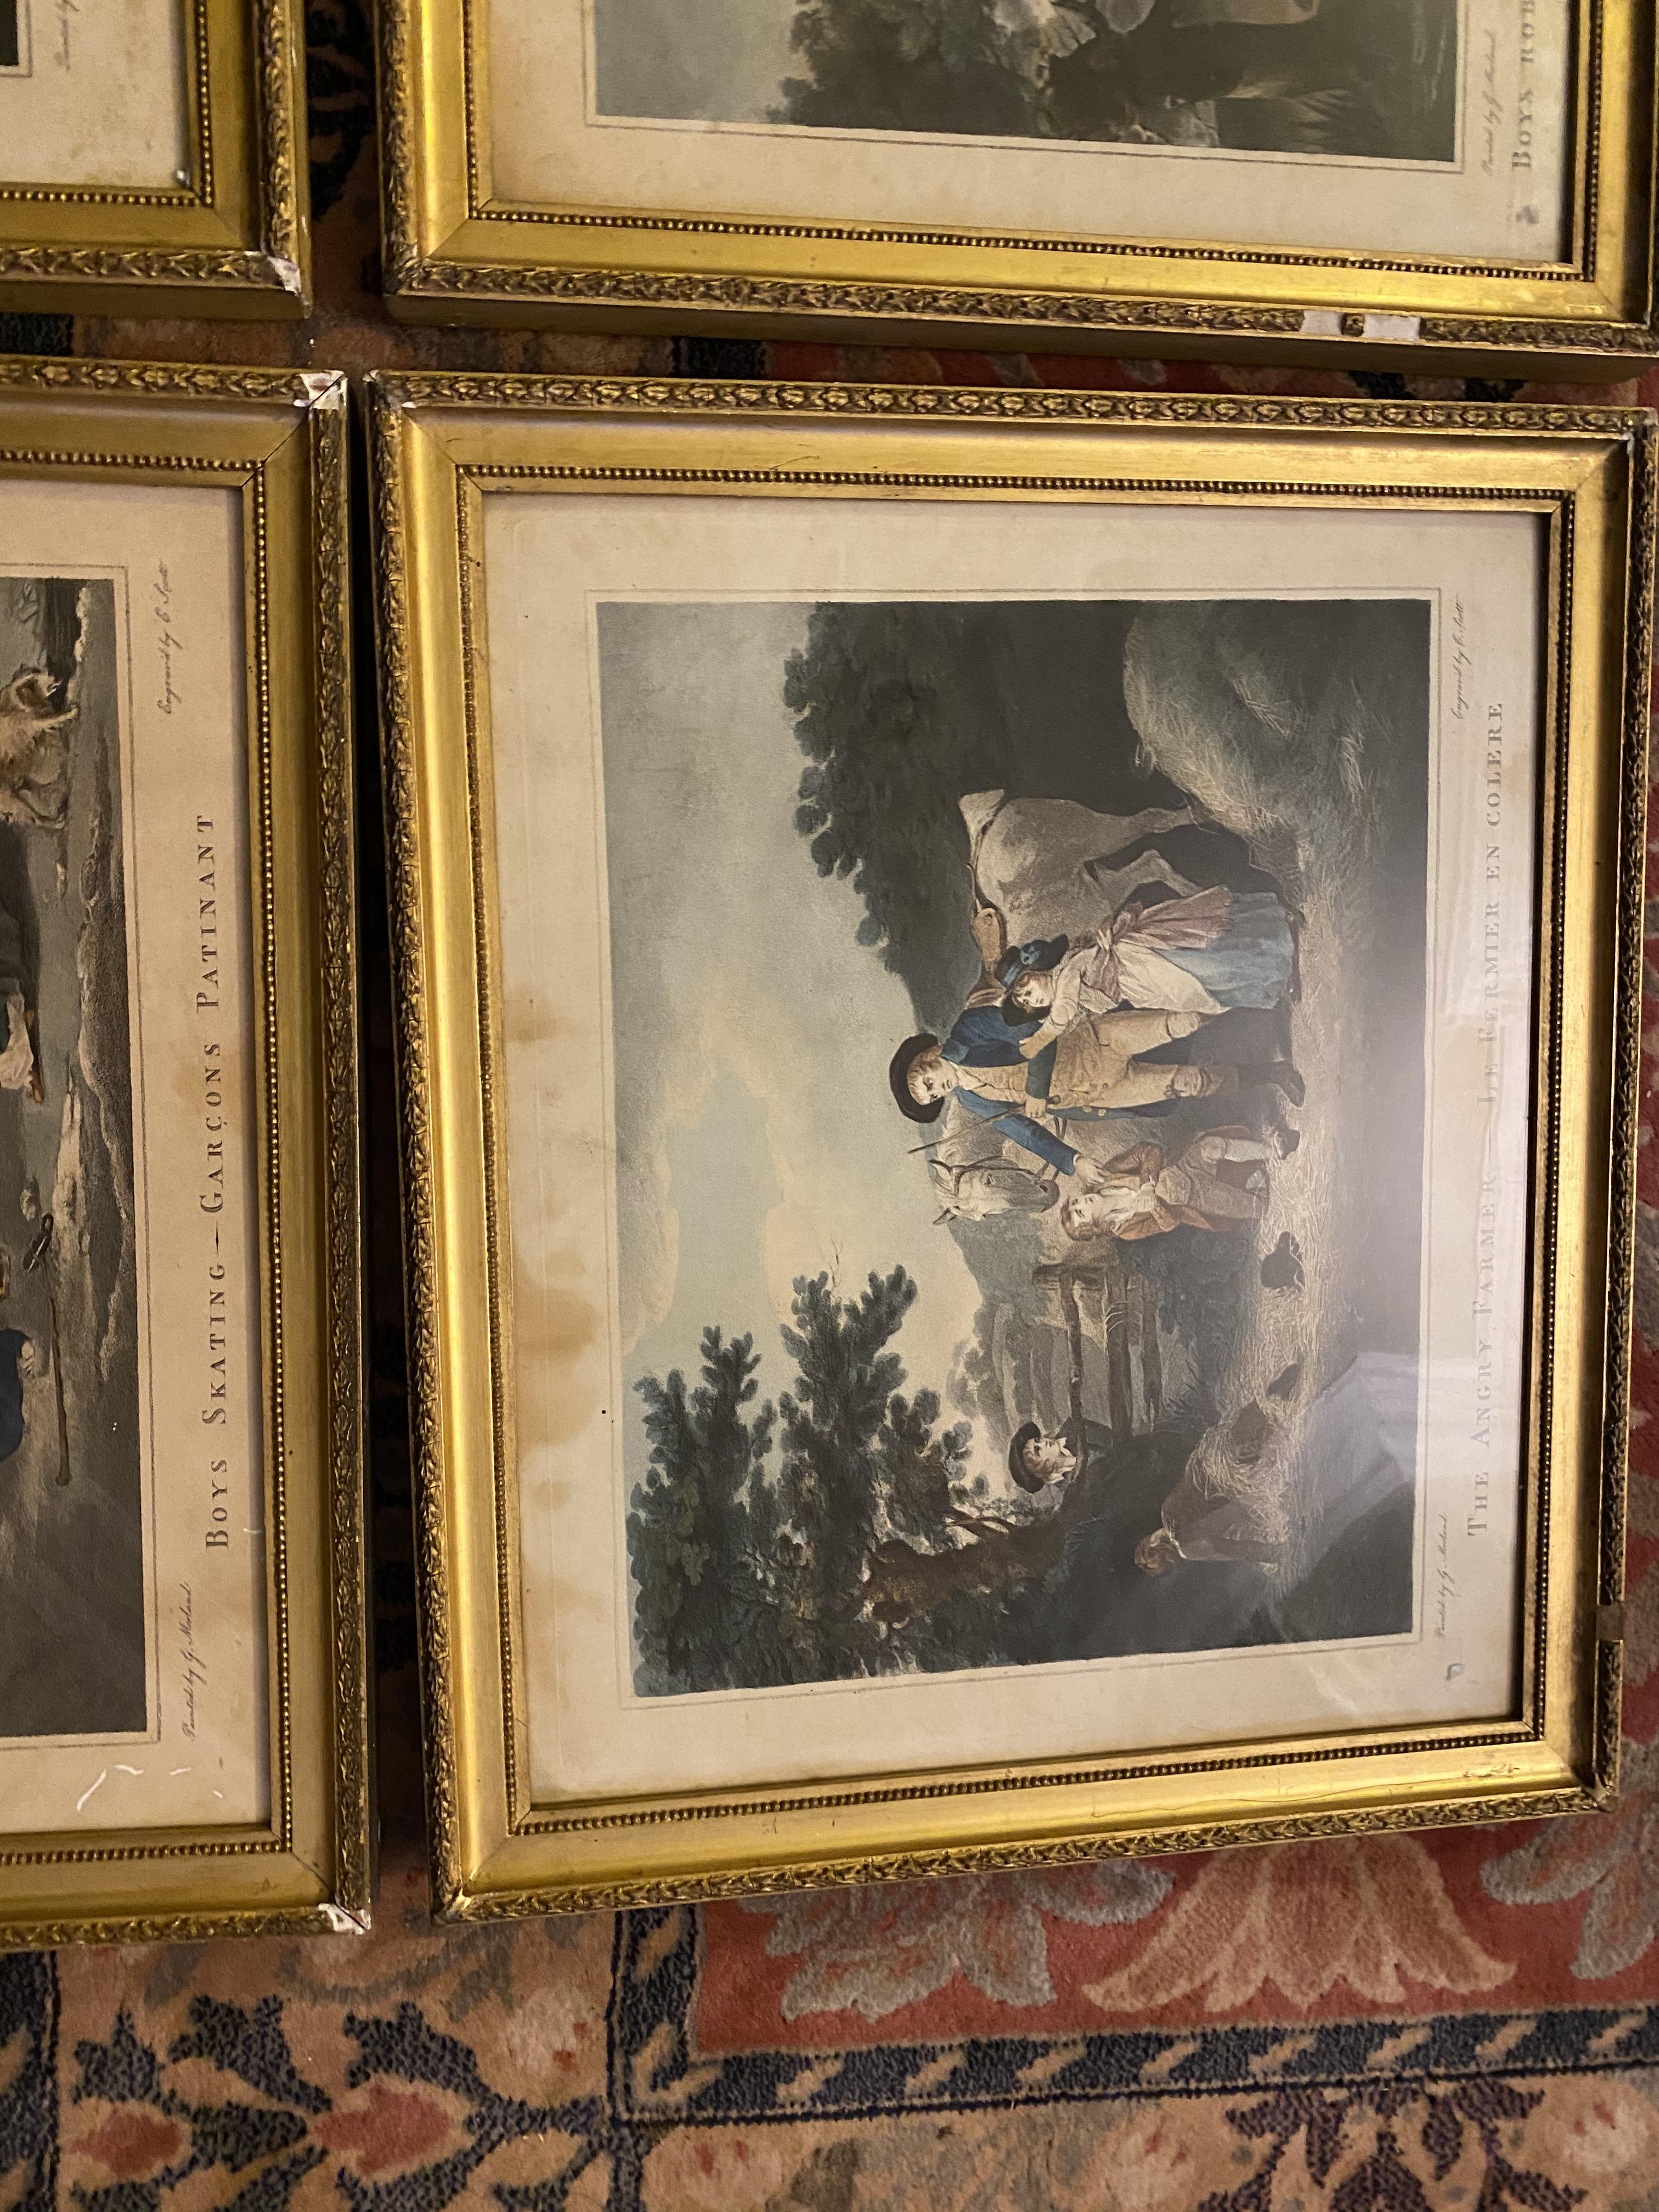 Set of four early C19th engravings by G Morland in original gilt frames - Image 5 of 5